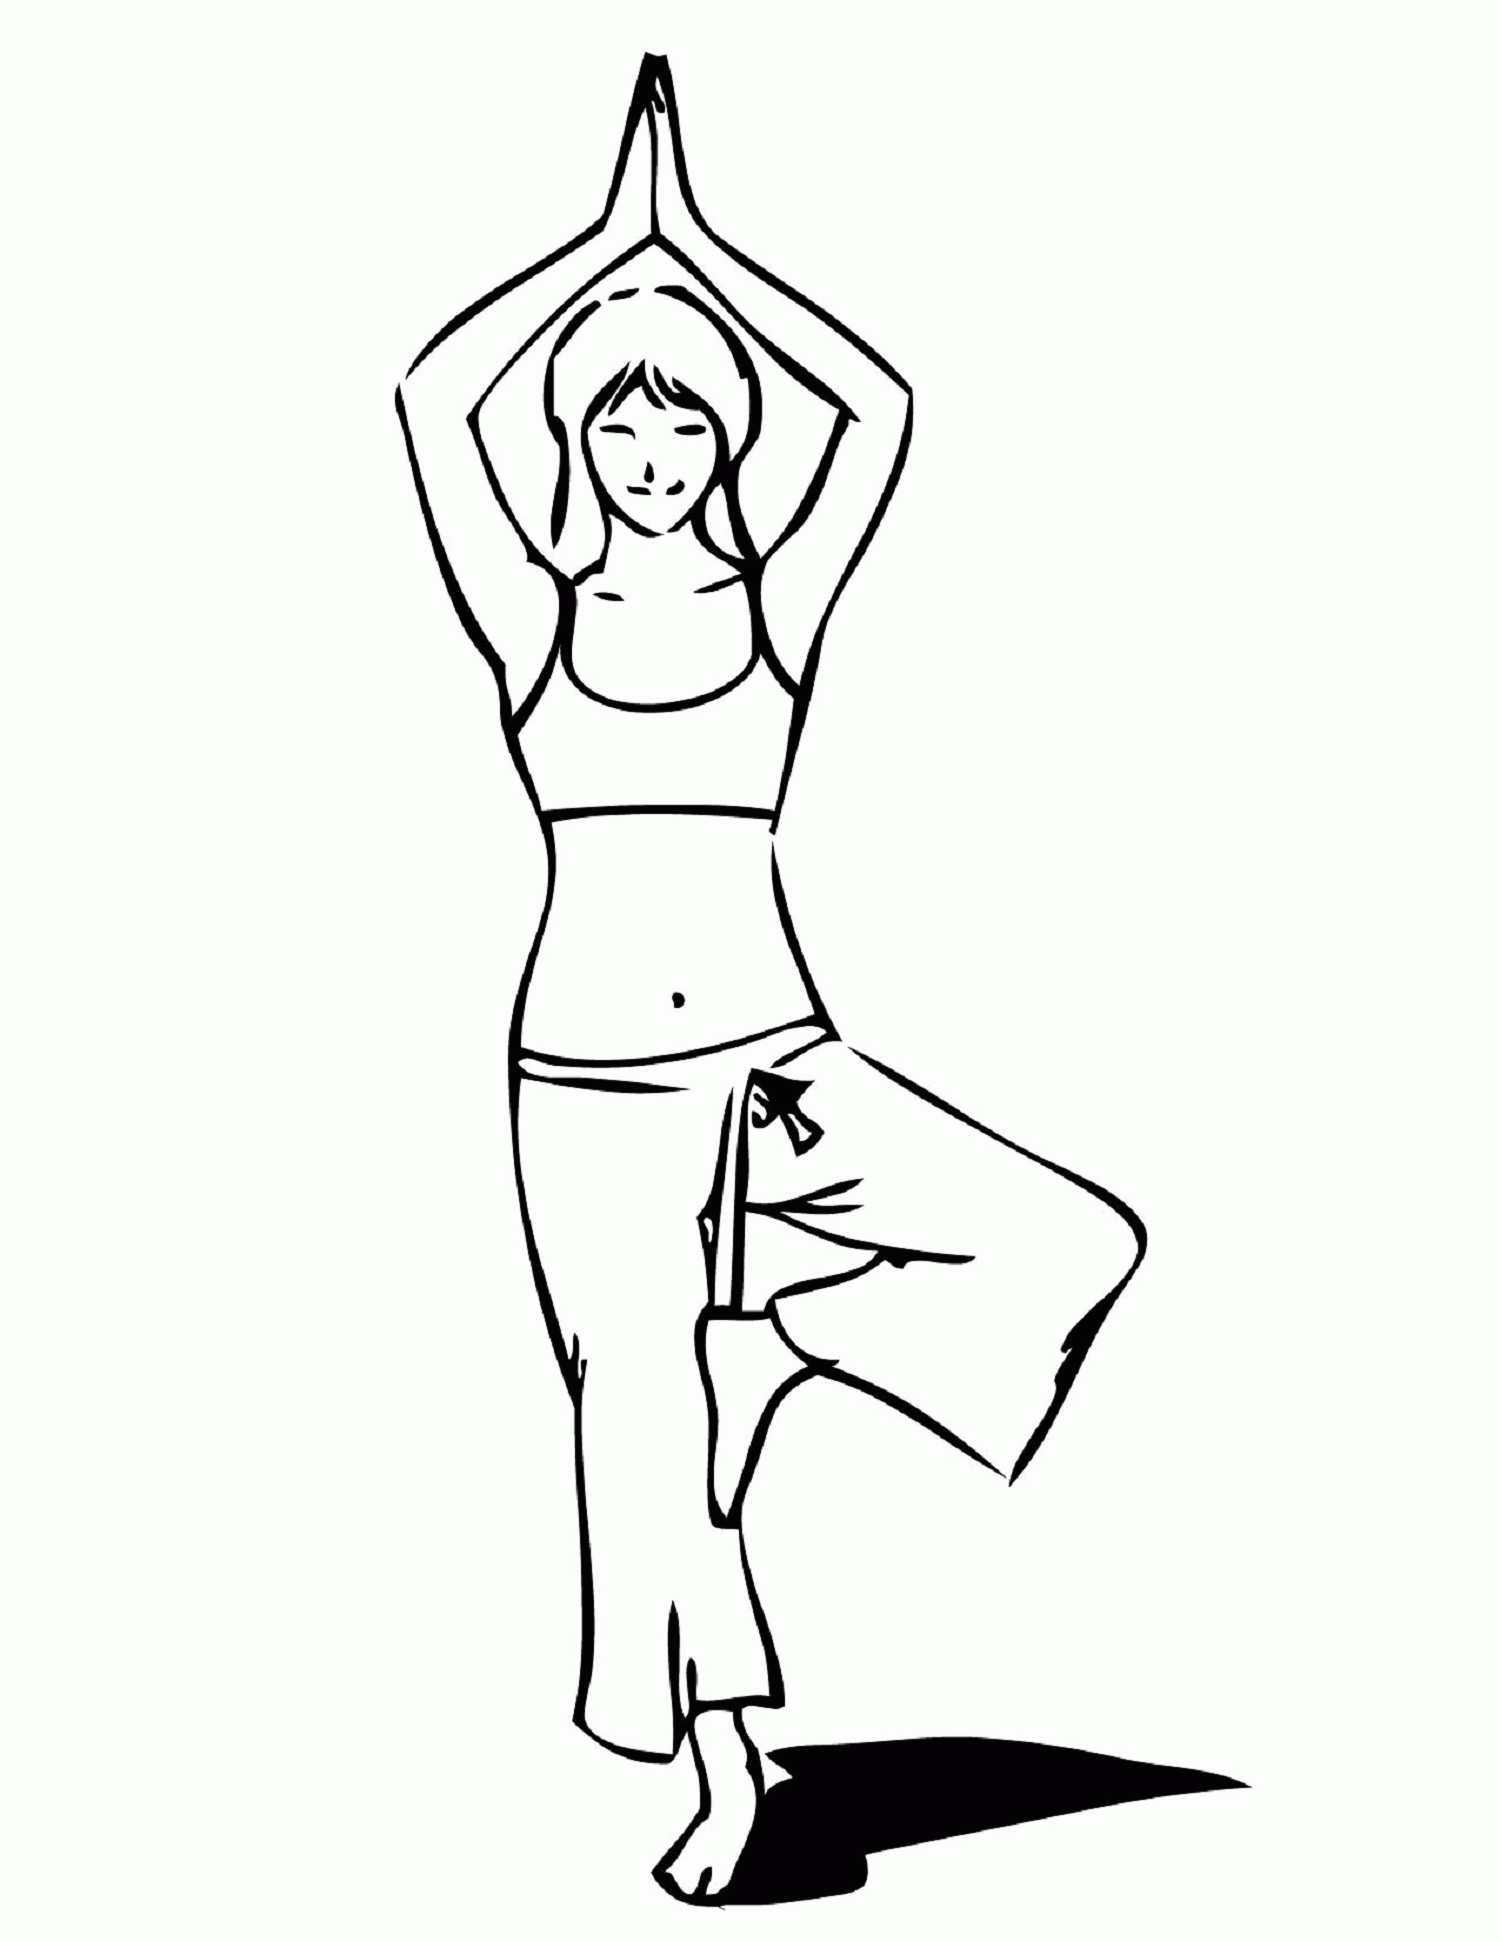 Fitness Coloring Pages Stock Illustrations – 189 Fitness Coloring Pages  Stock Illustrations, Vectors & Clipart - Dreamstime